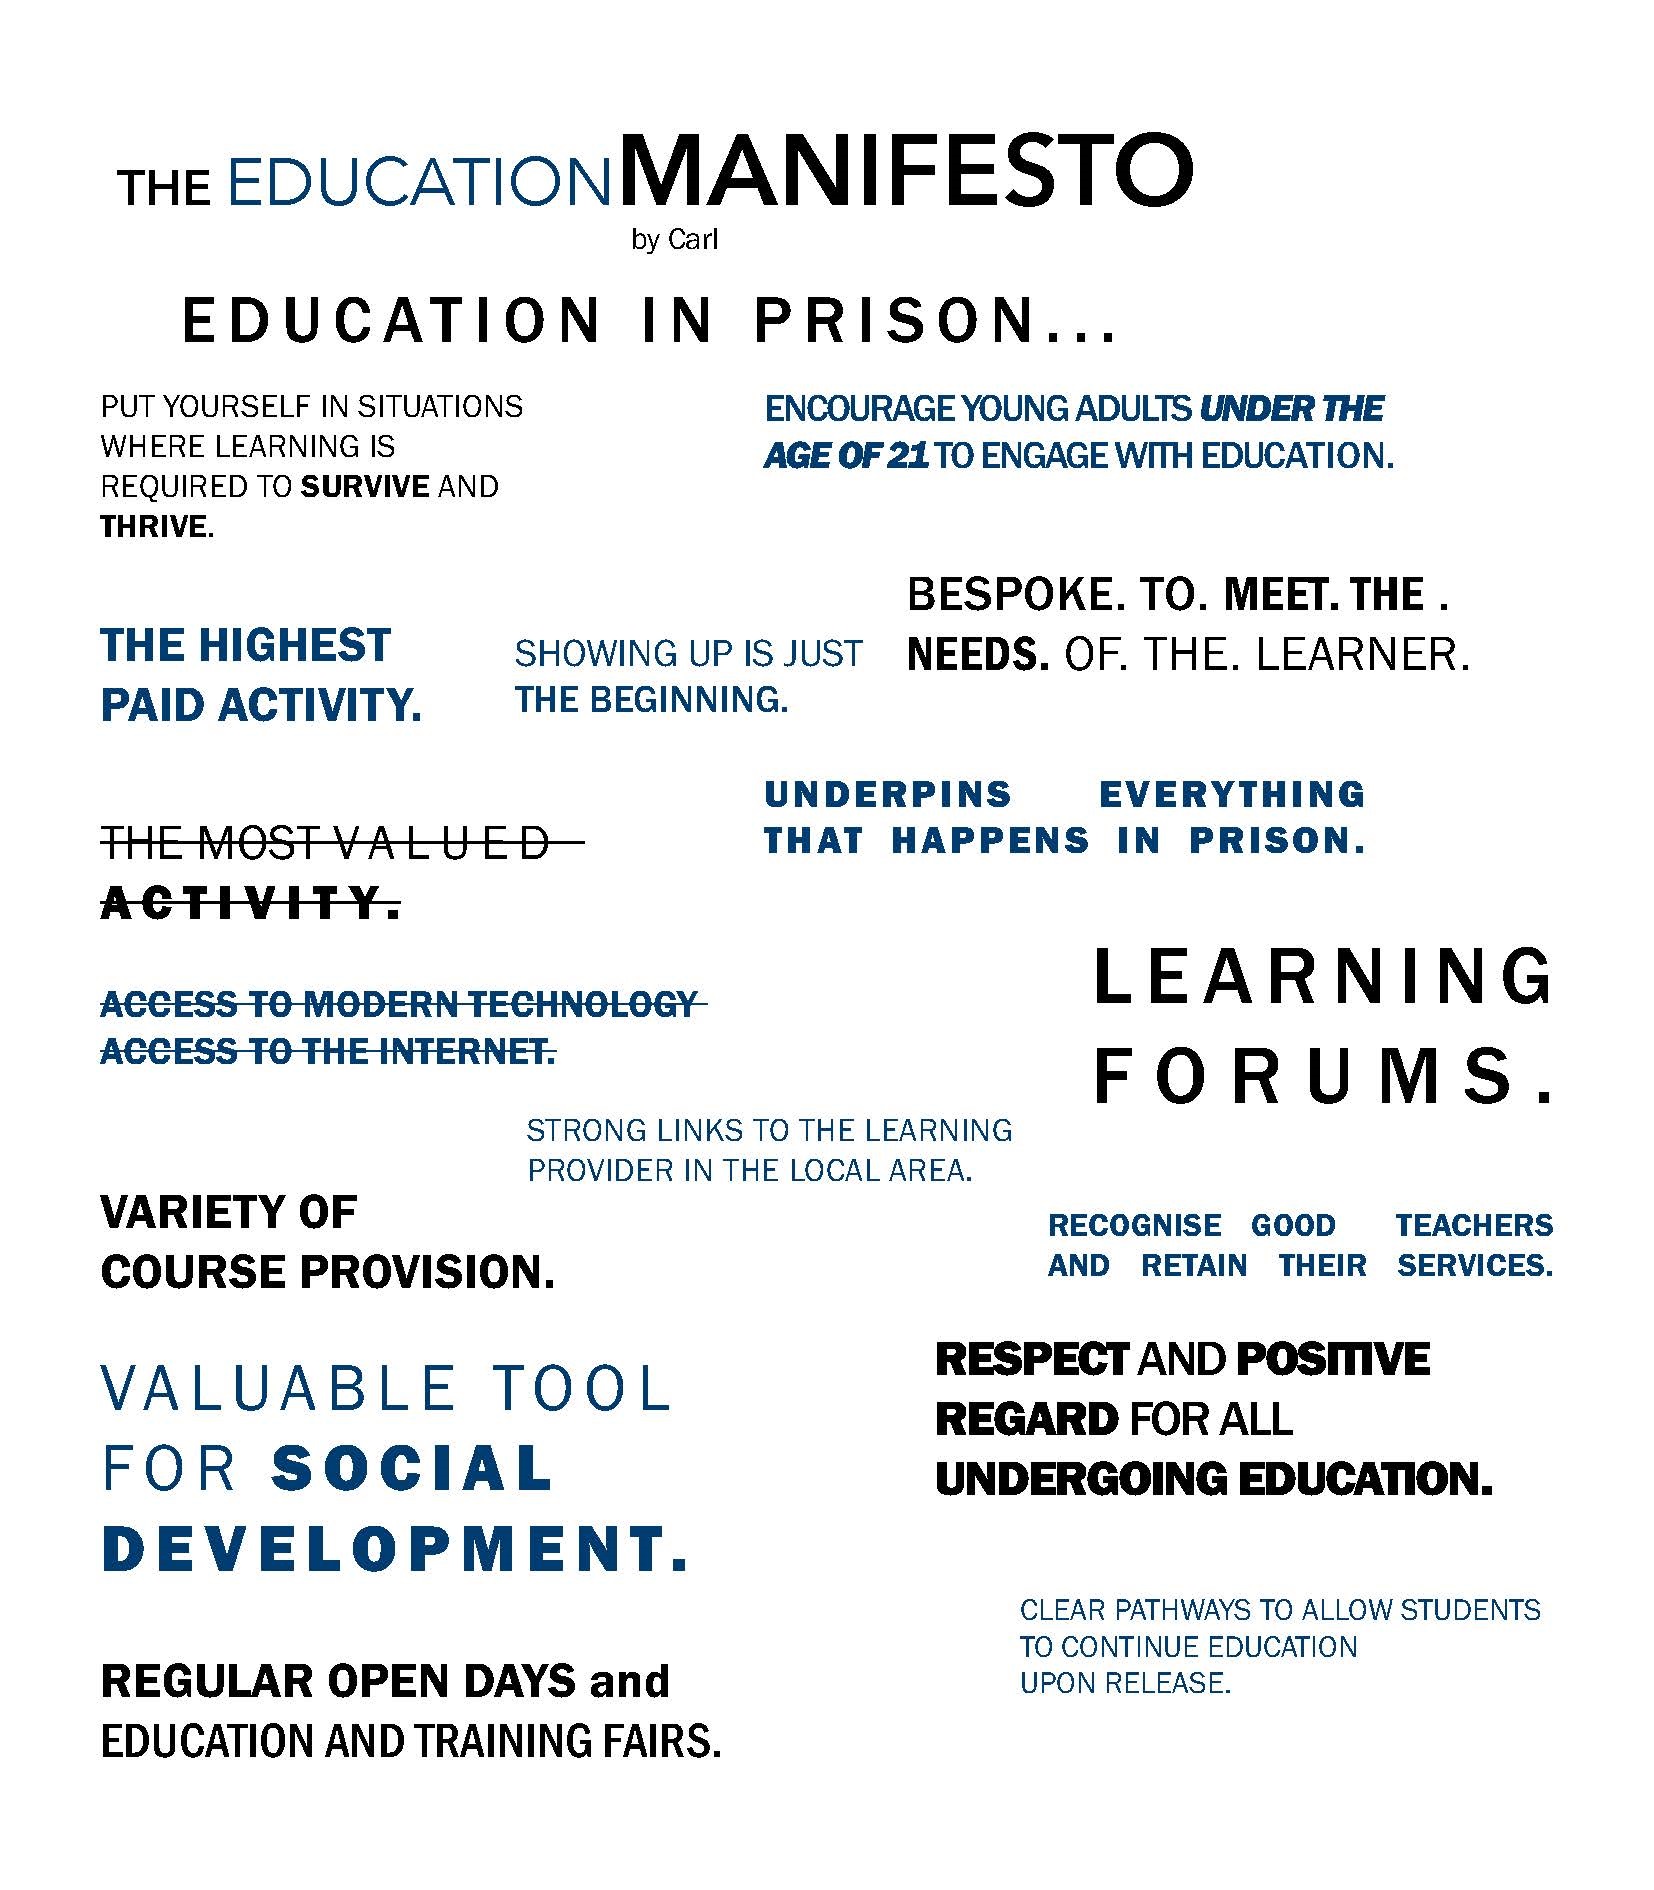 The Education Manifesto by Carl